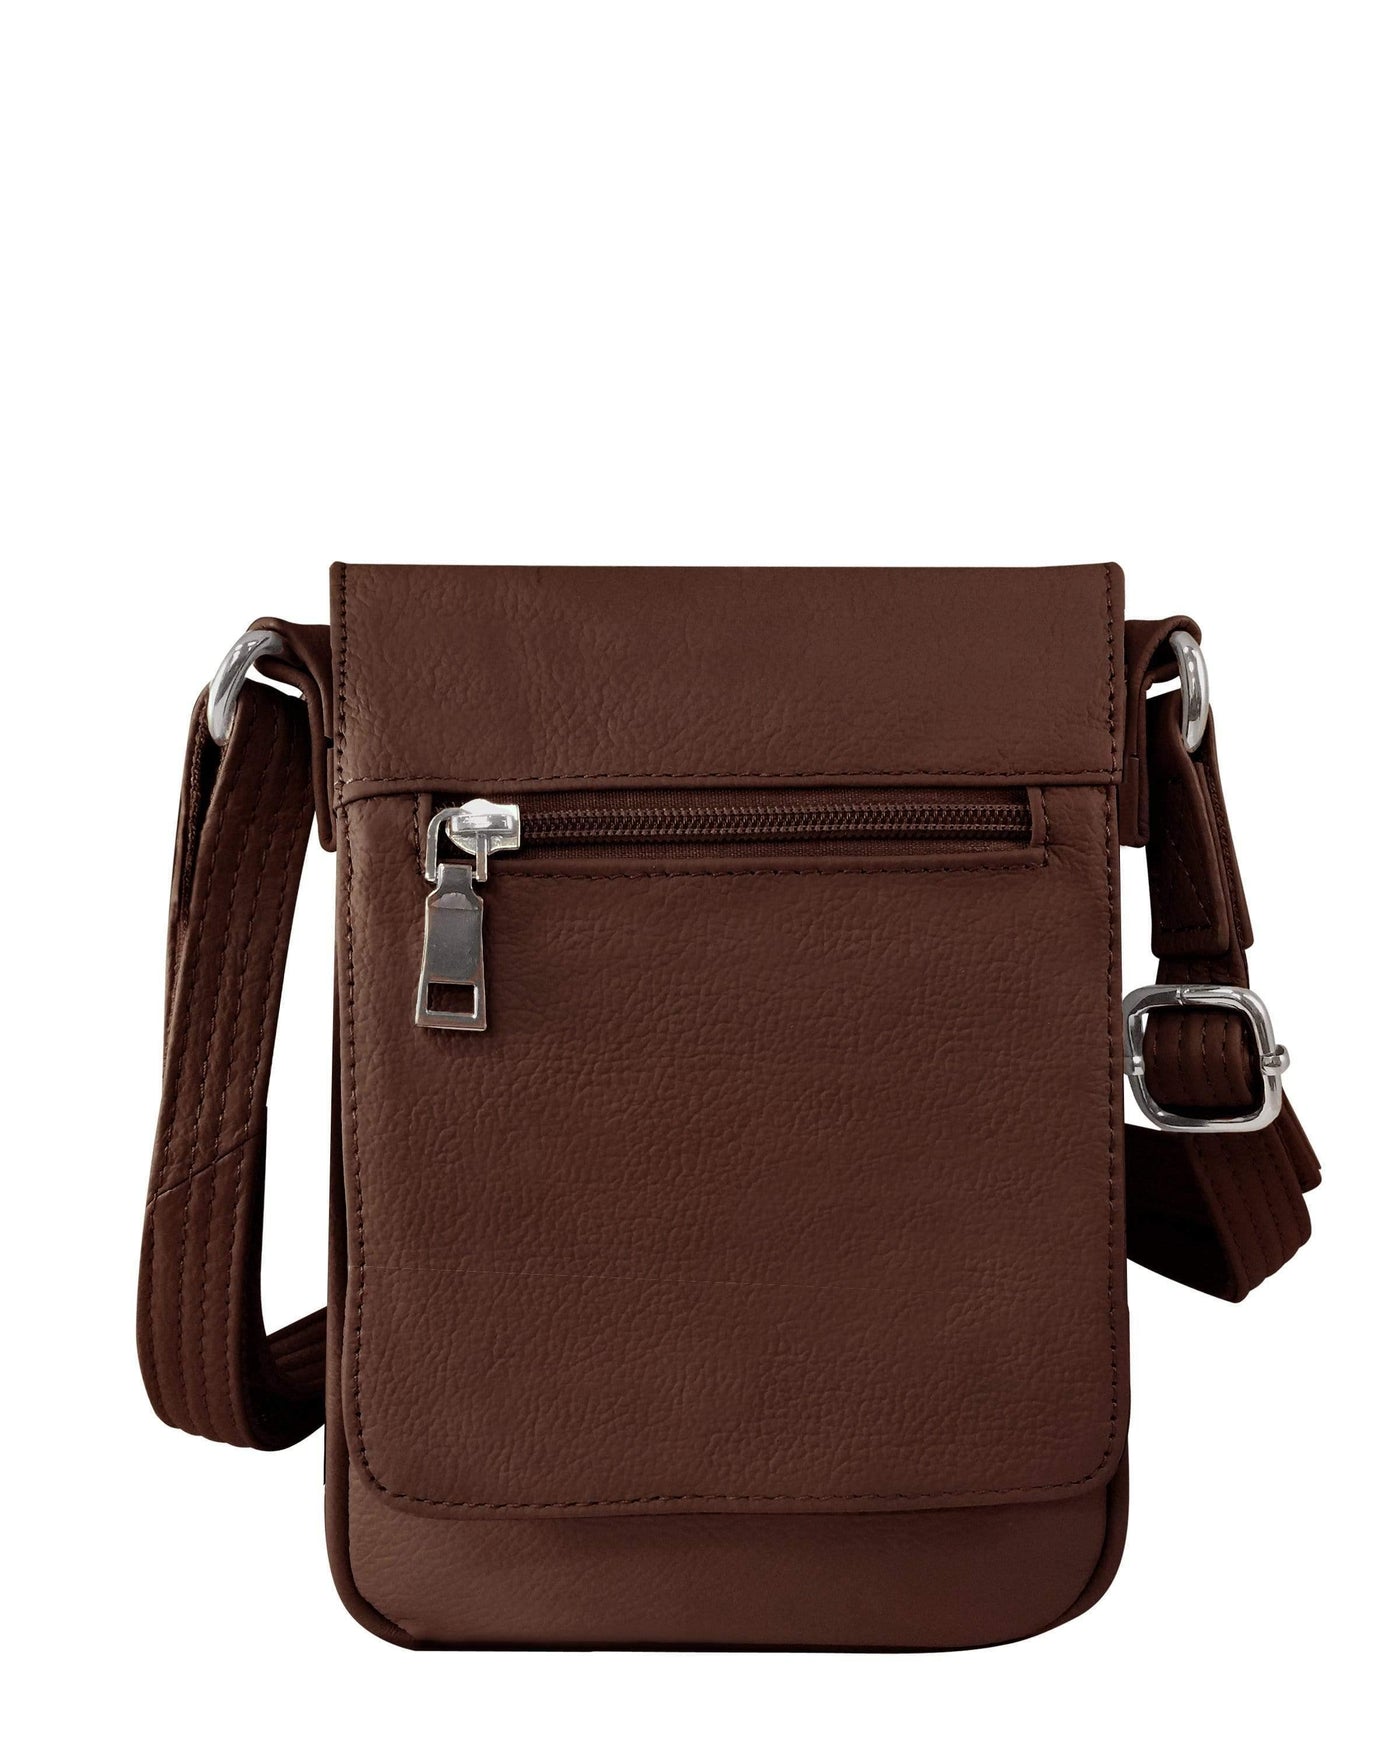 roma leathers concealed carry purse brown concealed carry vertical leather crossbody by roma leathers